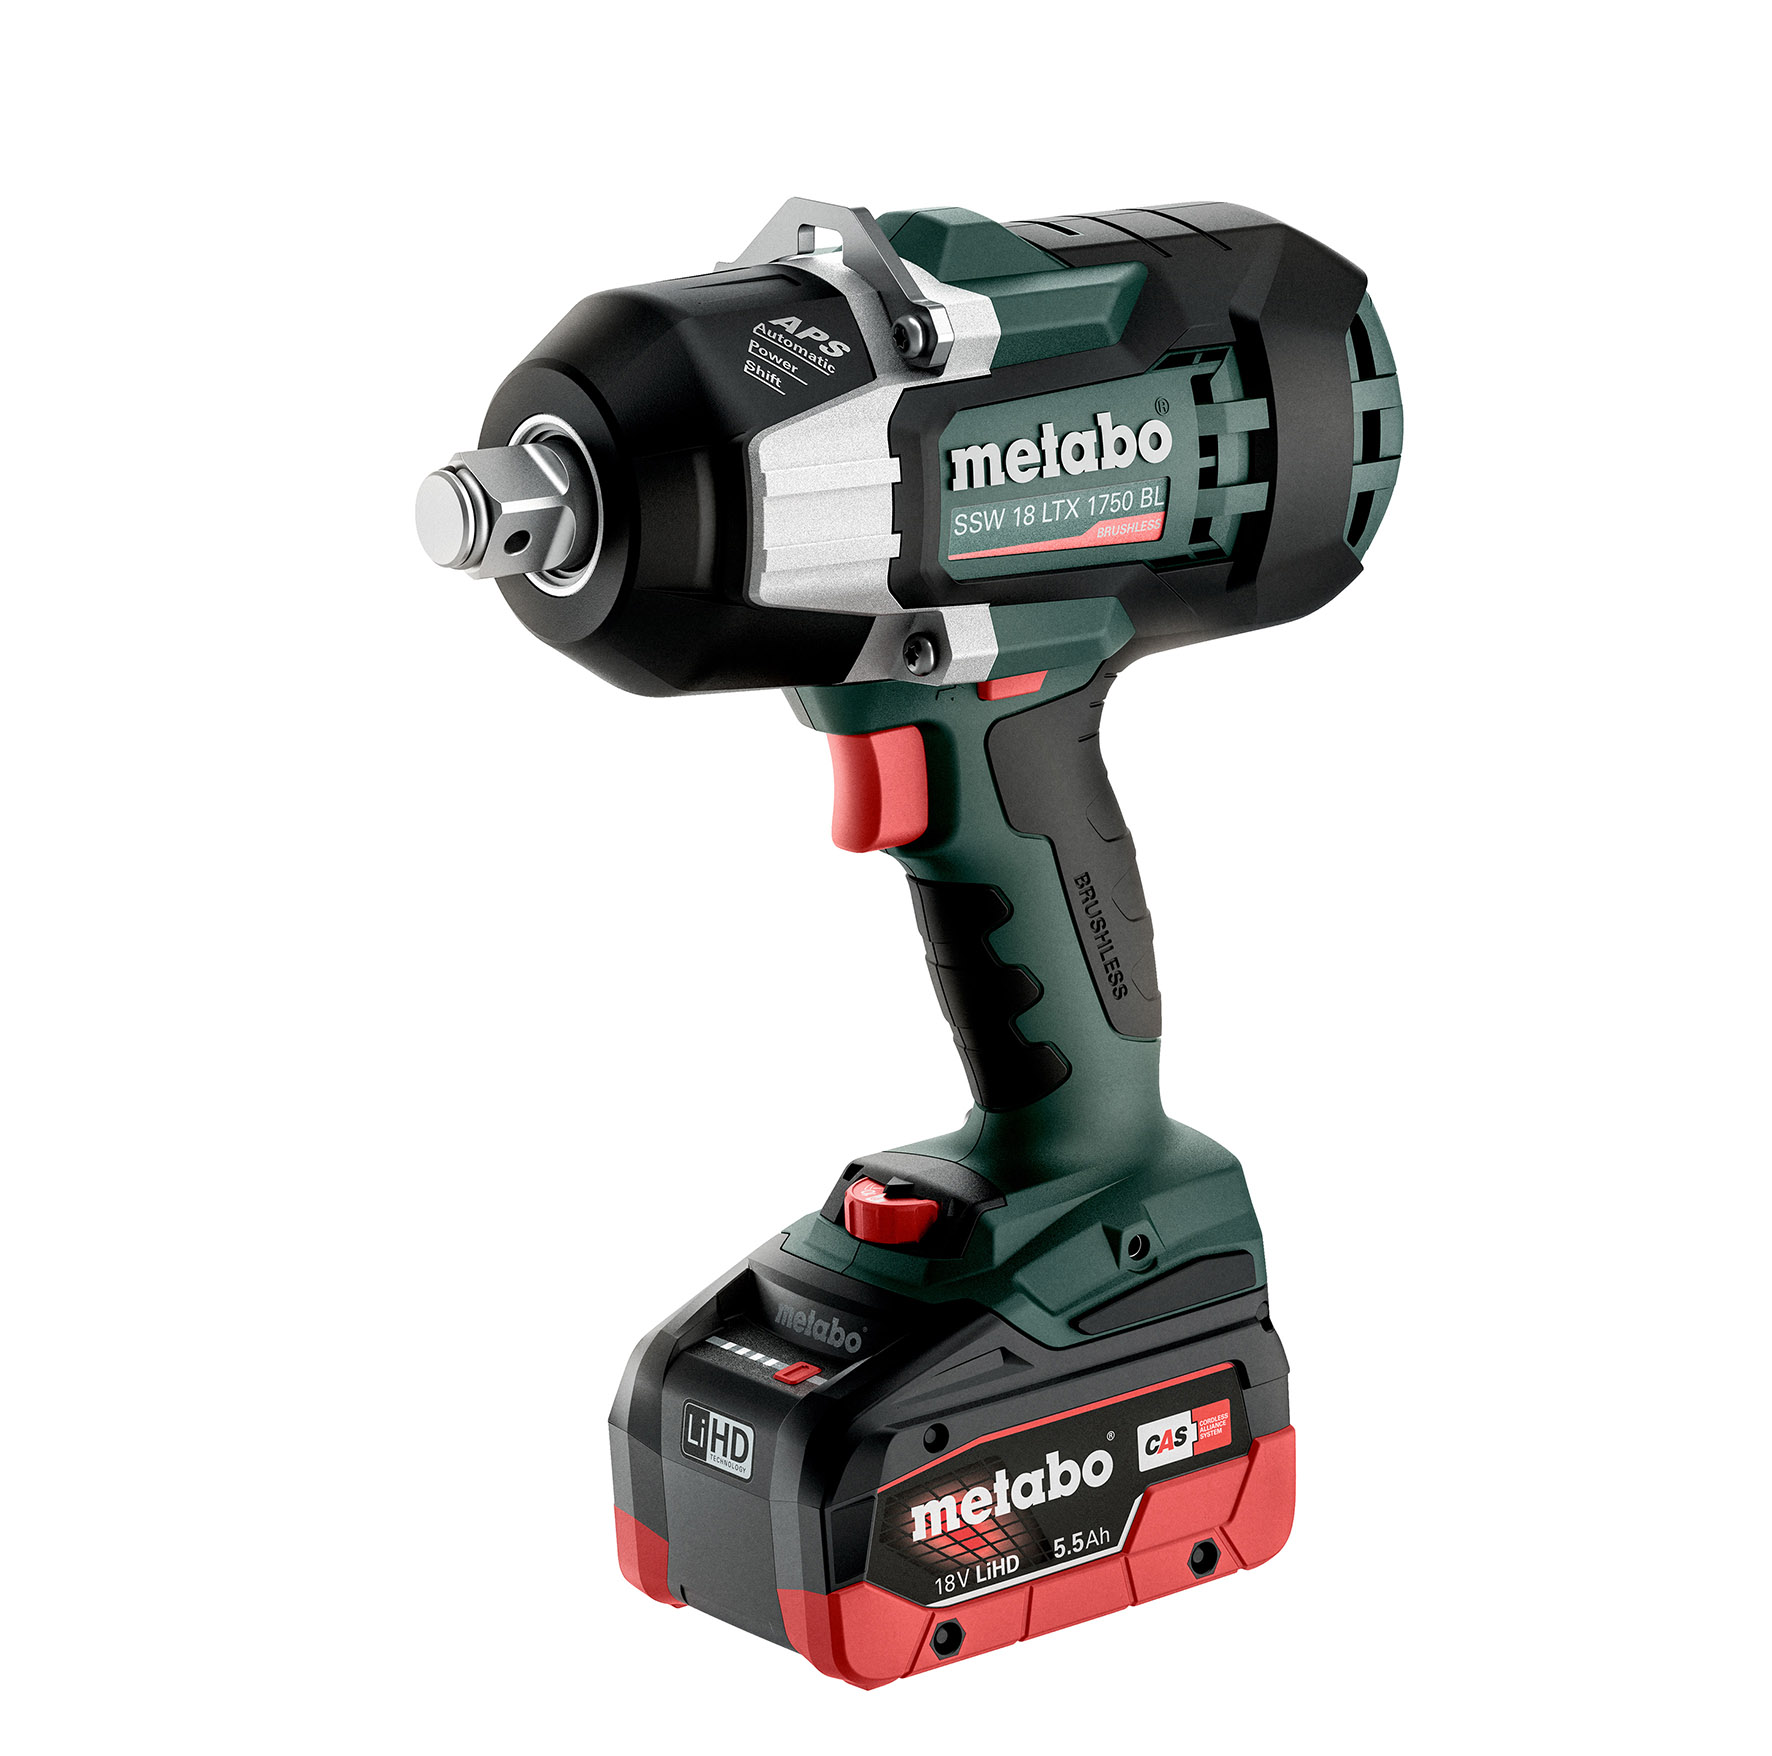 The new SSW 18 LTX 1750 BL cordless impact wrench from Metabo © Metabo